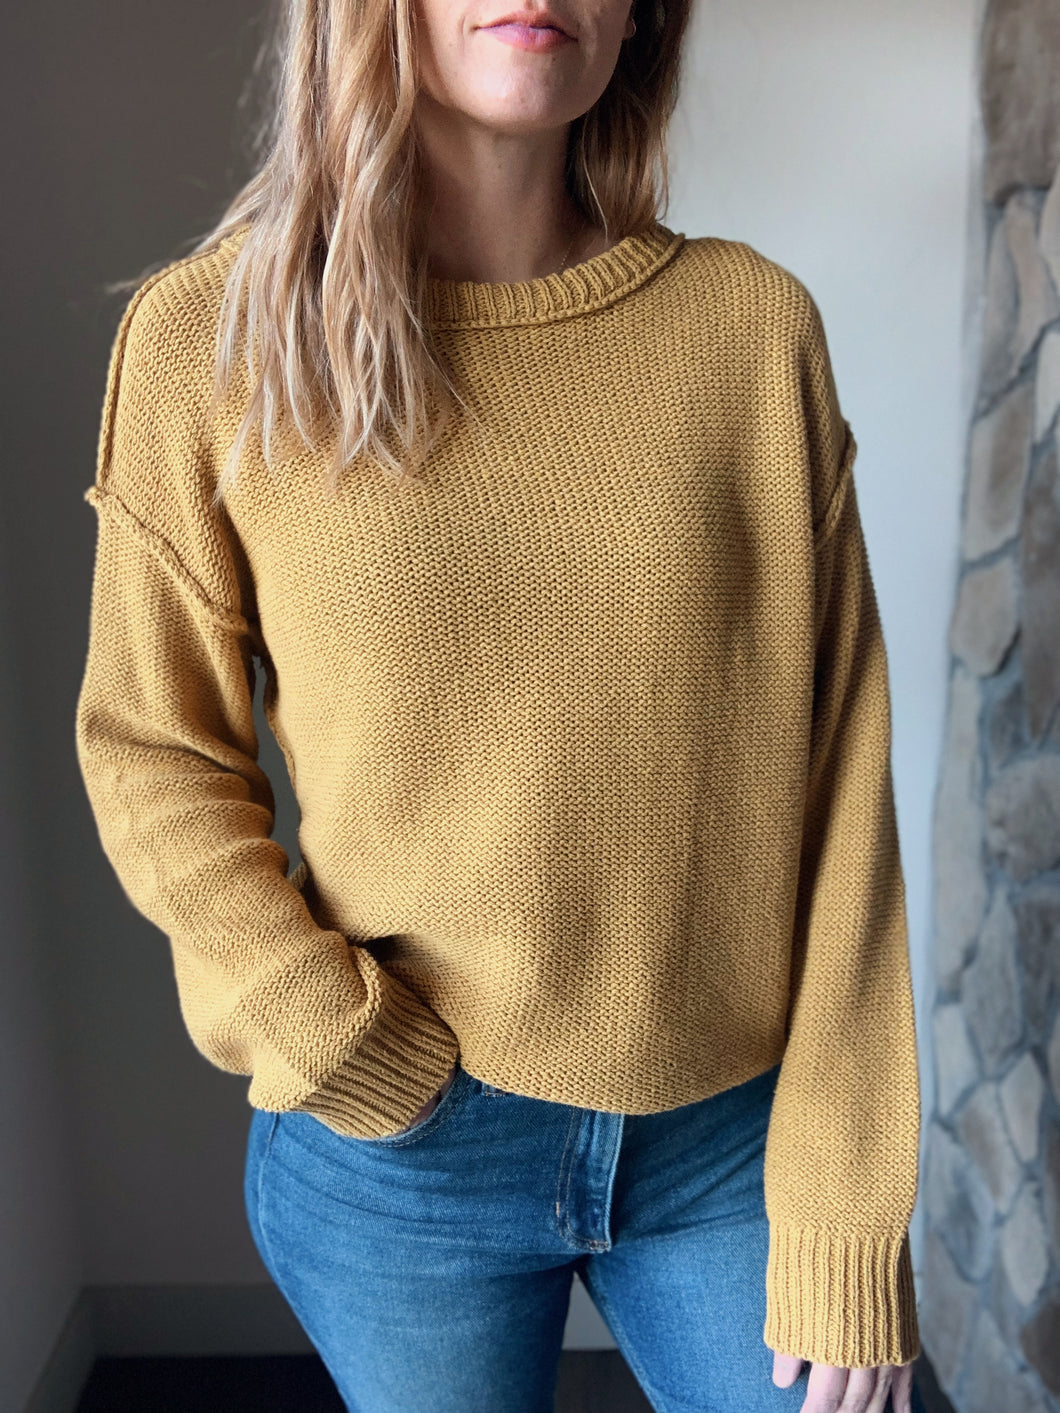 gold cotton chunky knit sweater